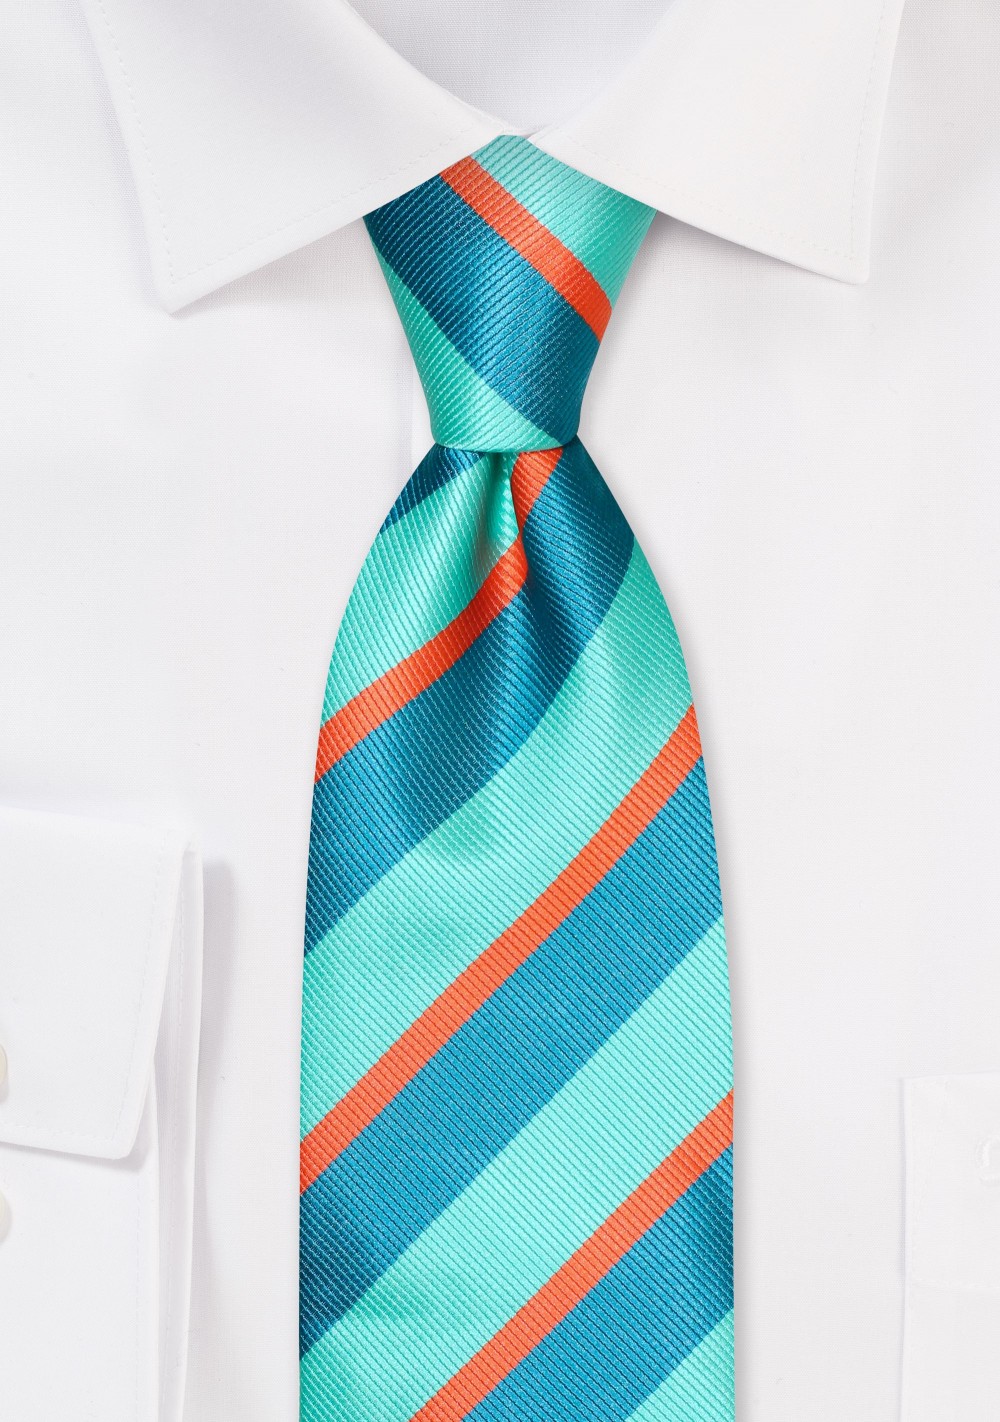 Preppy Striped Tie in Teal and Turquoise